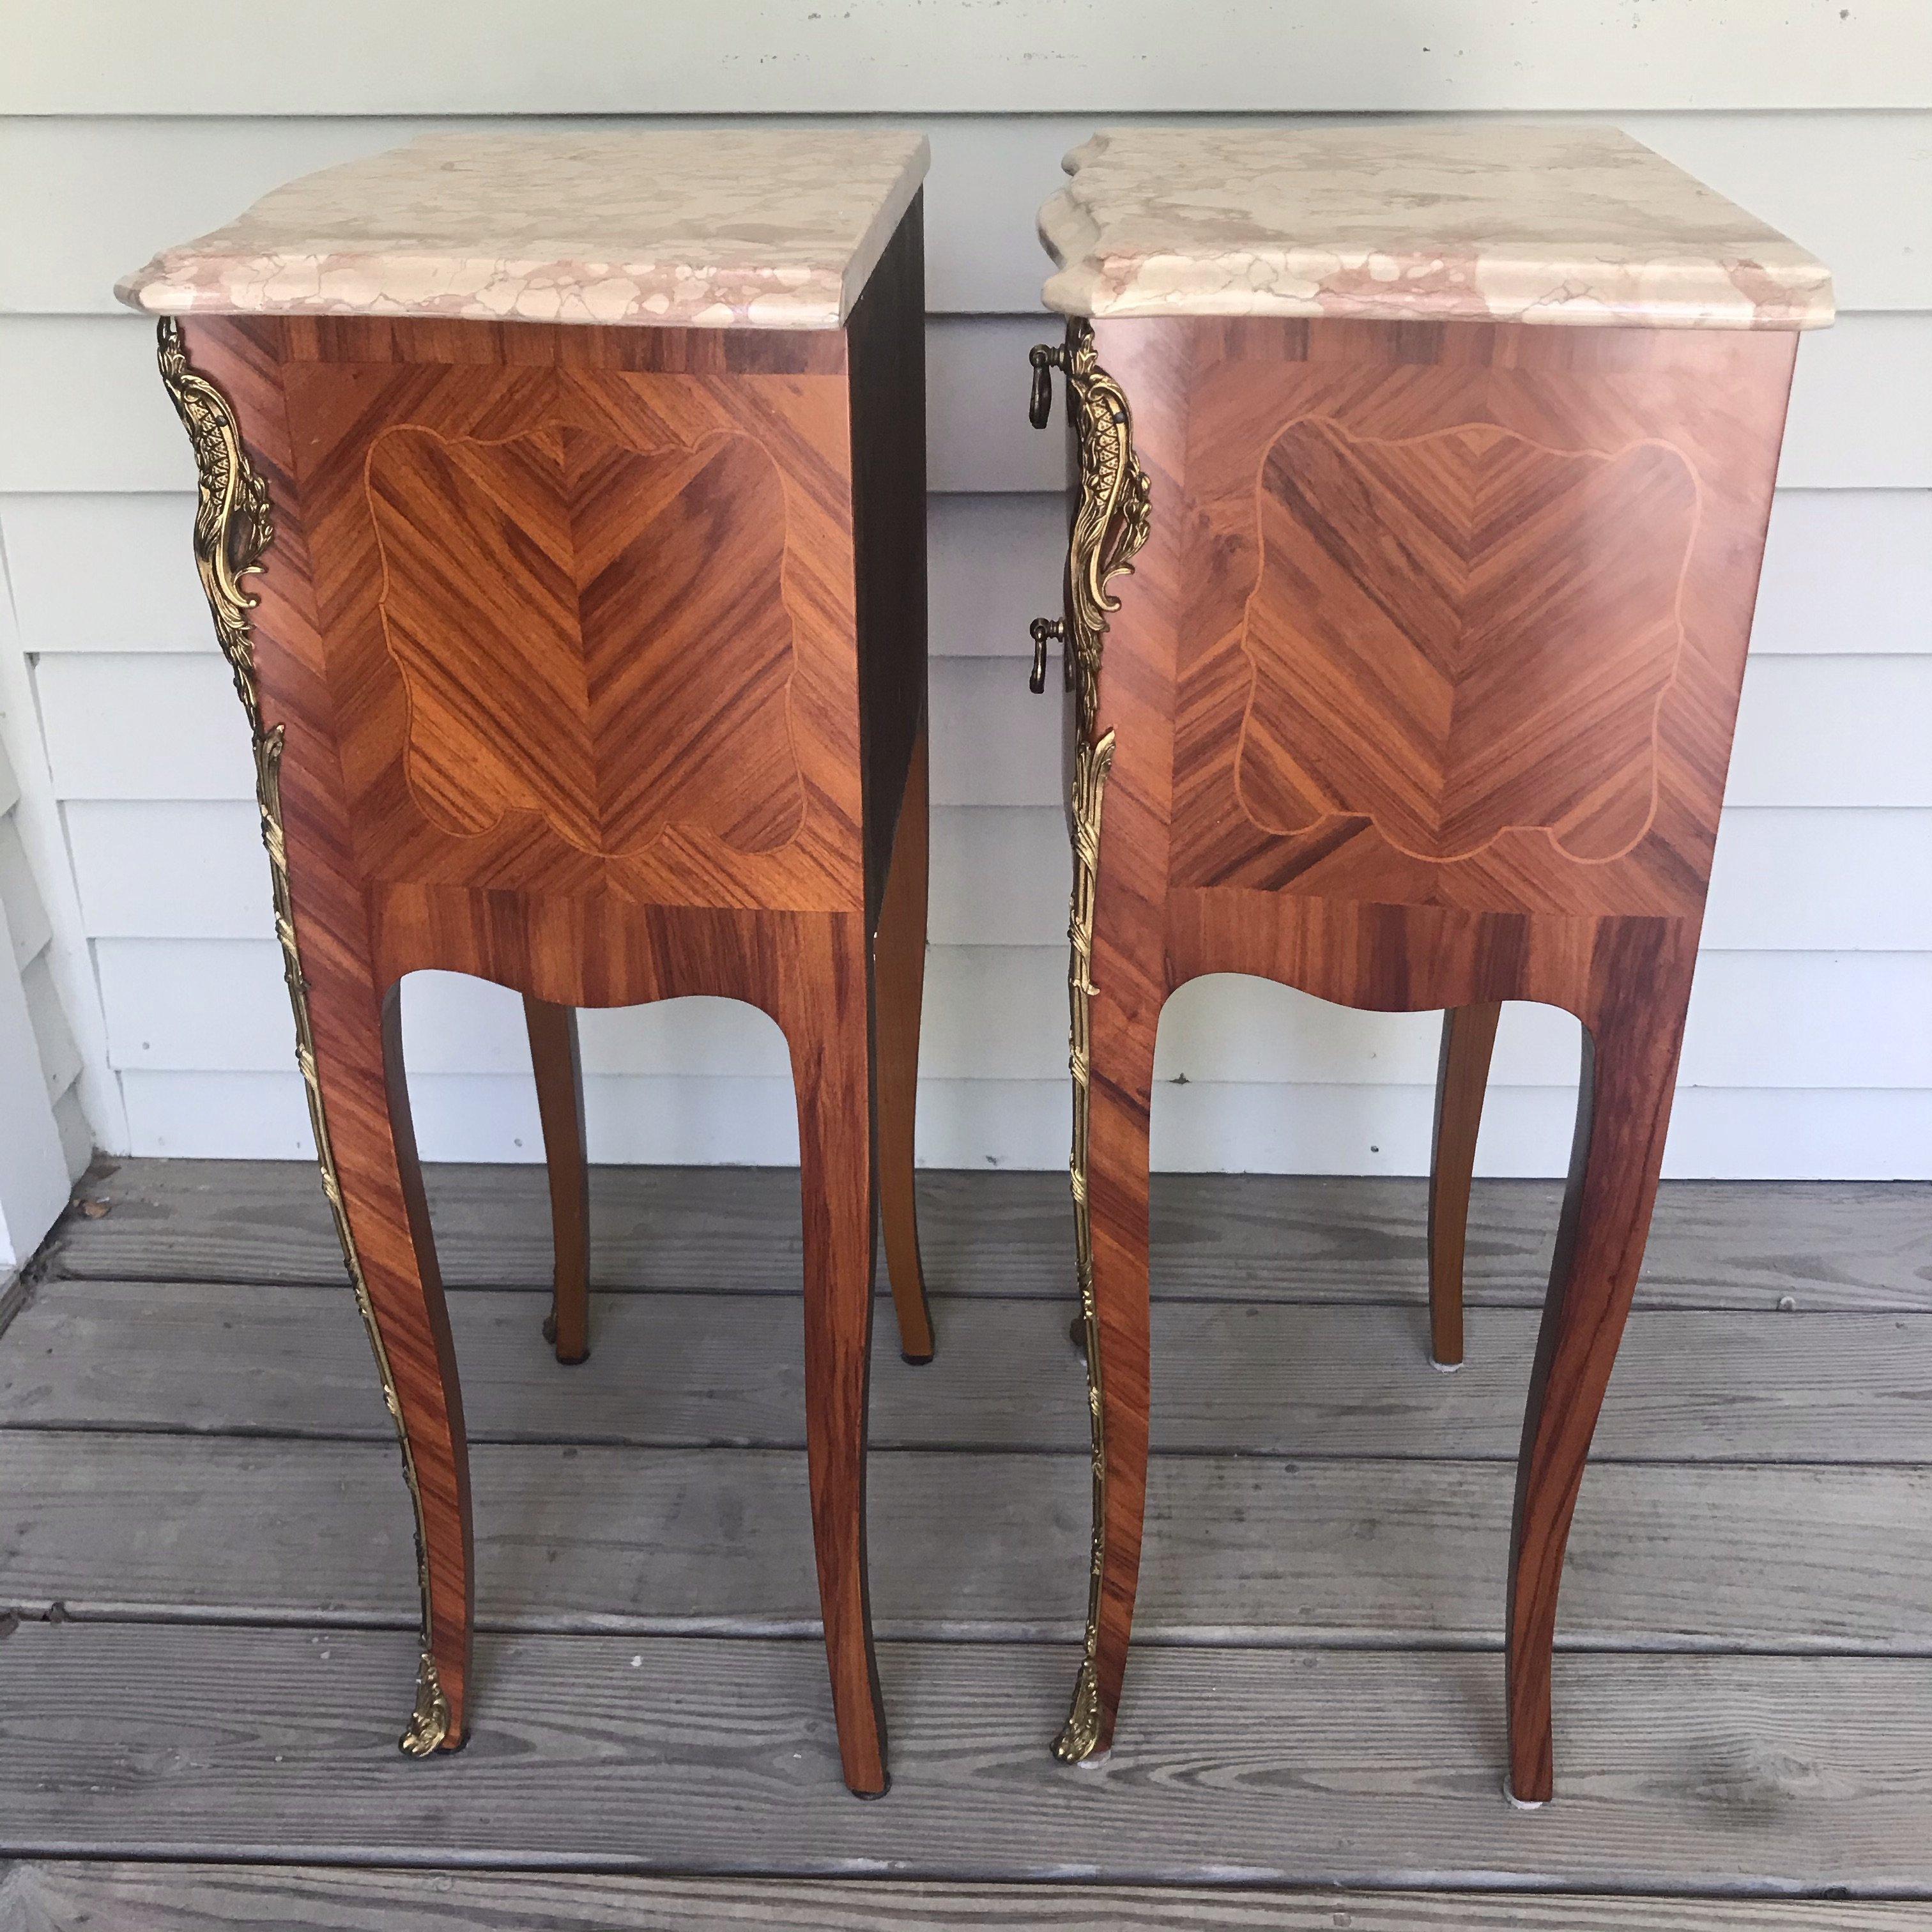 Pair of lovely French Louis XV marble-top nightstands from Lyon, France having gorgeous brass decoration and hard ward, elegant cabriole legs and 2 drawers in each.

#4525.